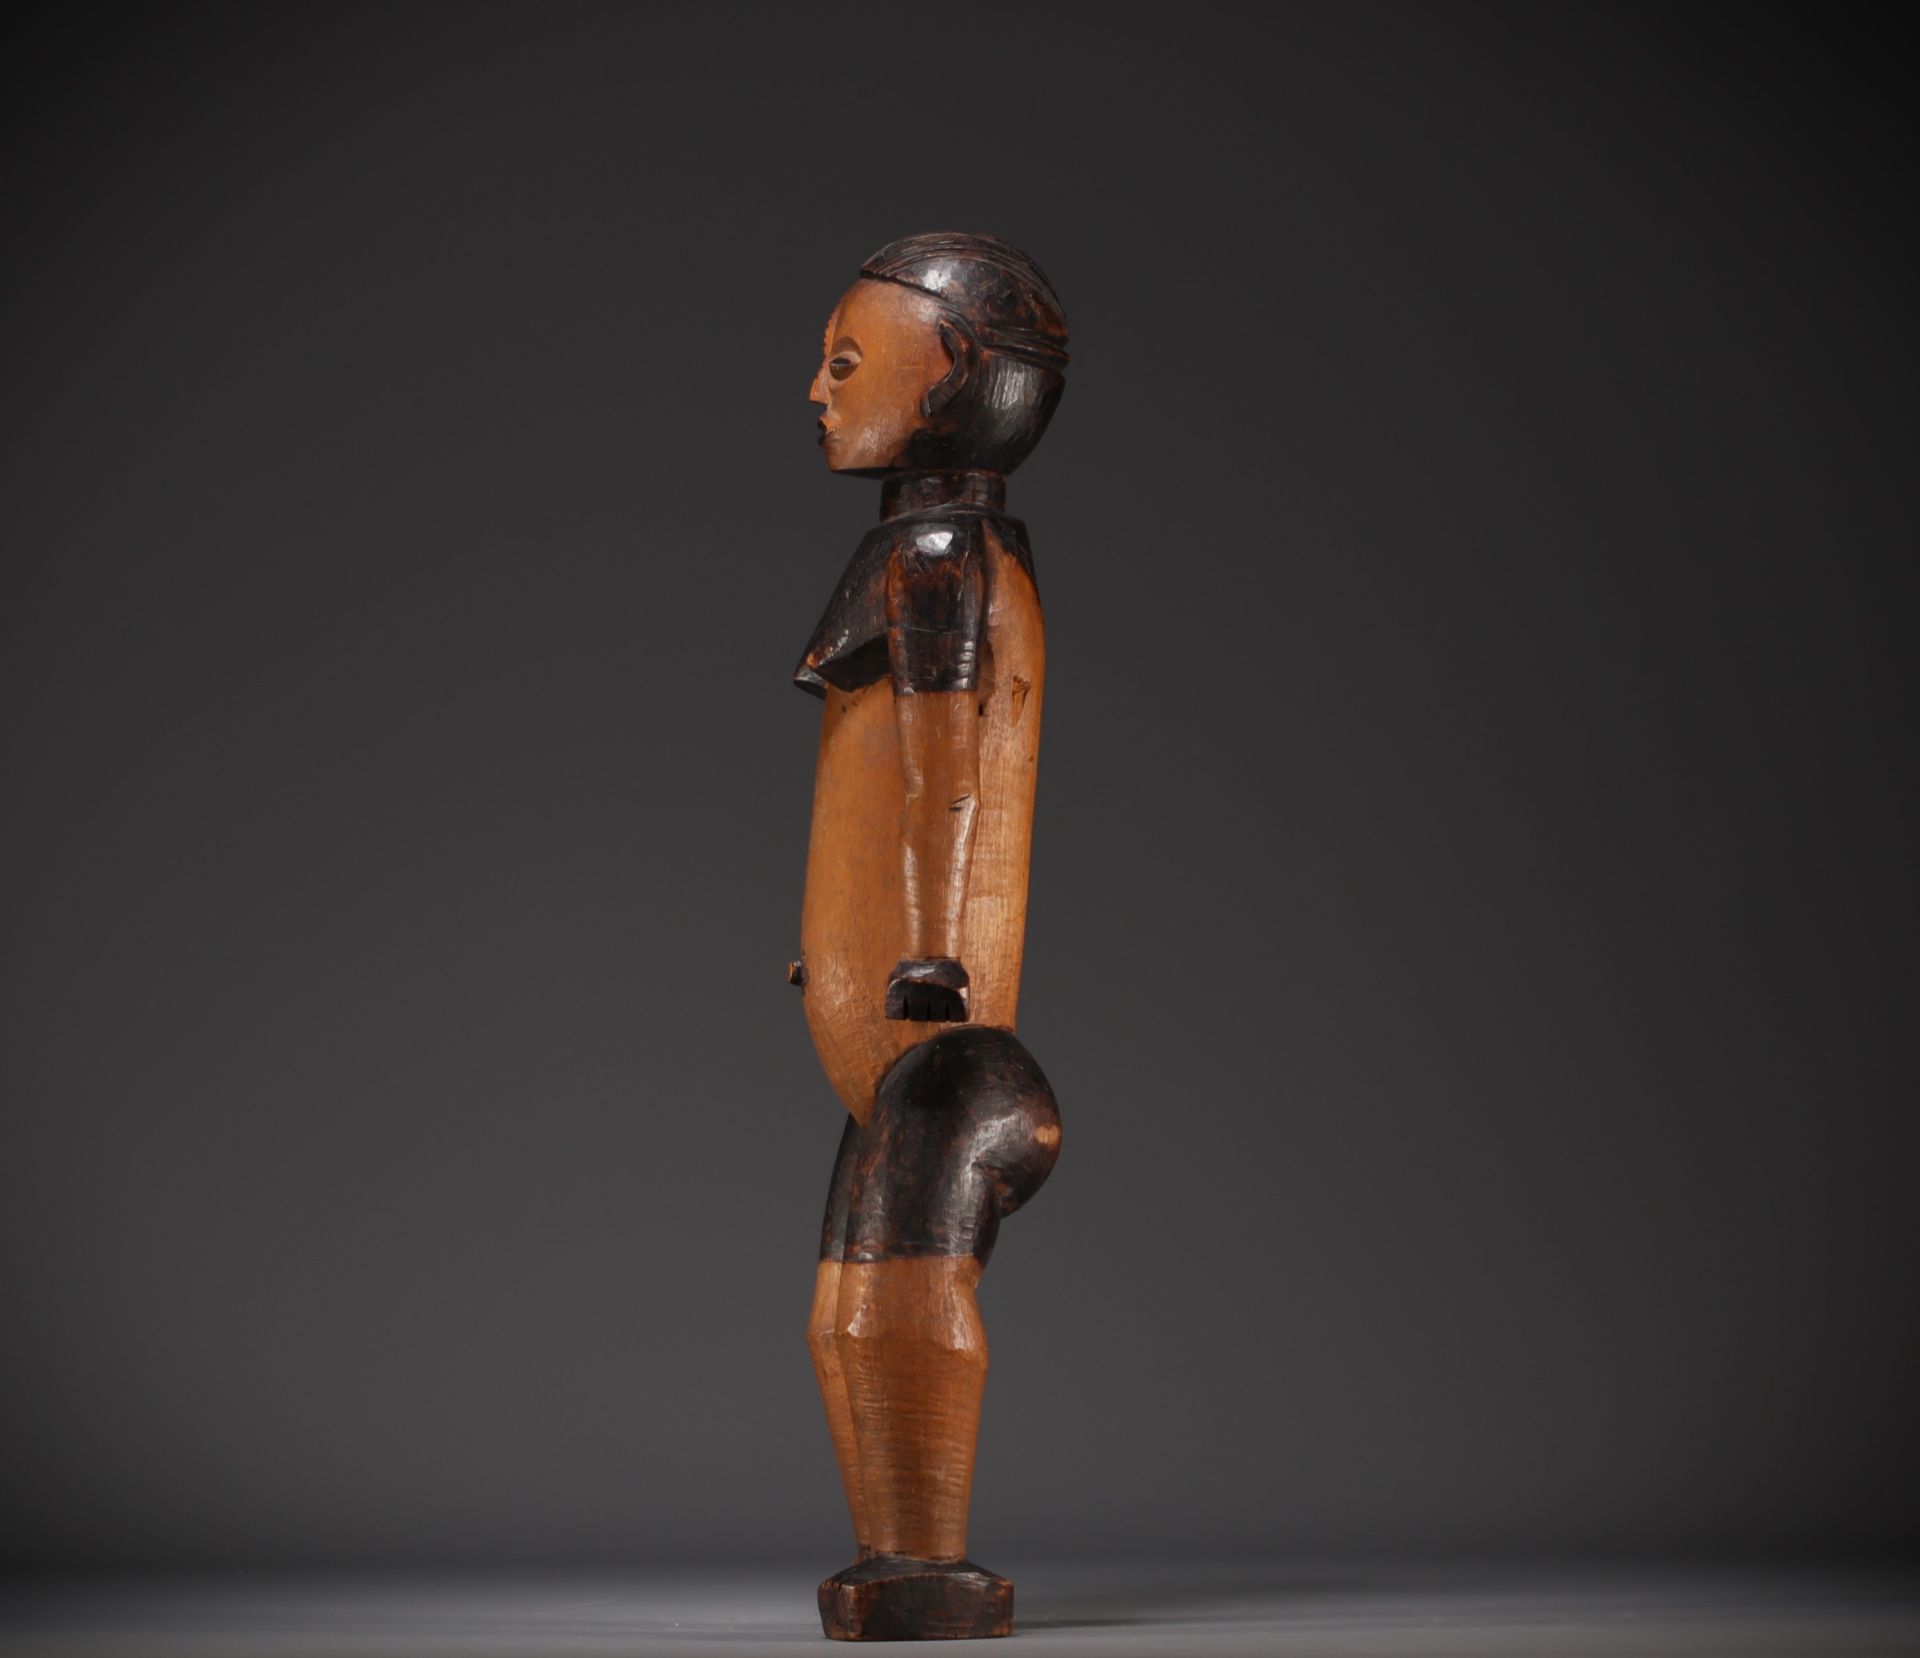 Large Mbanza or Ngbaka figure collected around 1900 - Rep.Dem.Congo - Image 4 of 5